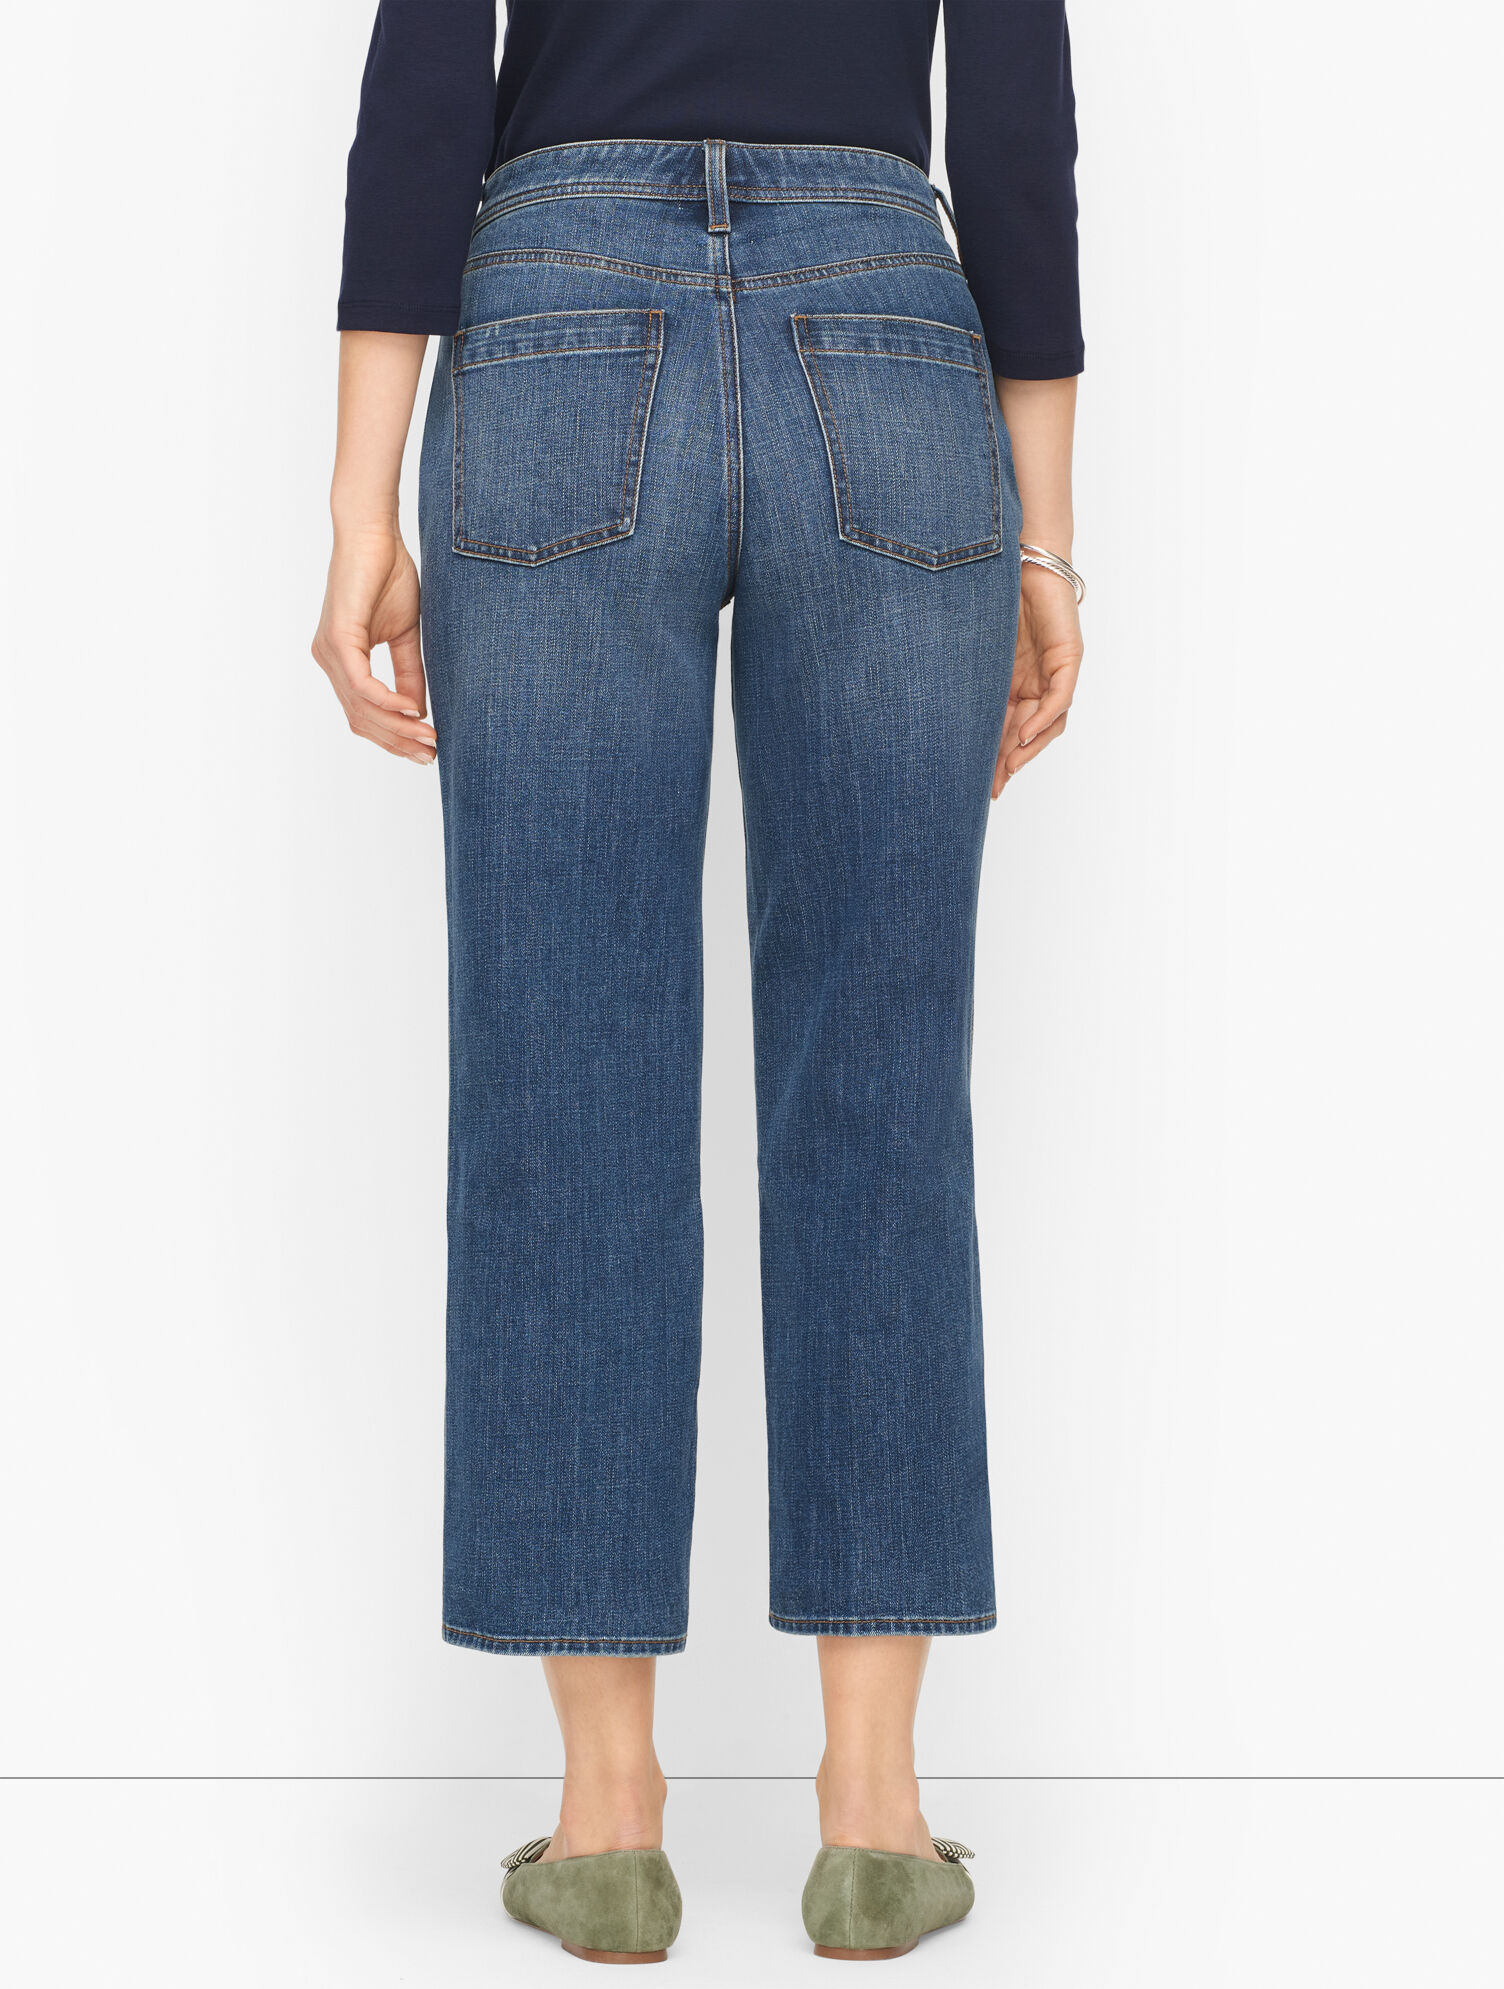 Stovepipe Jeans - Pacific Wash | Talbots